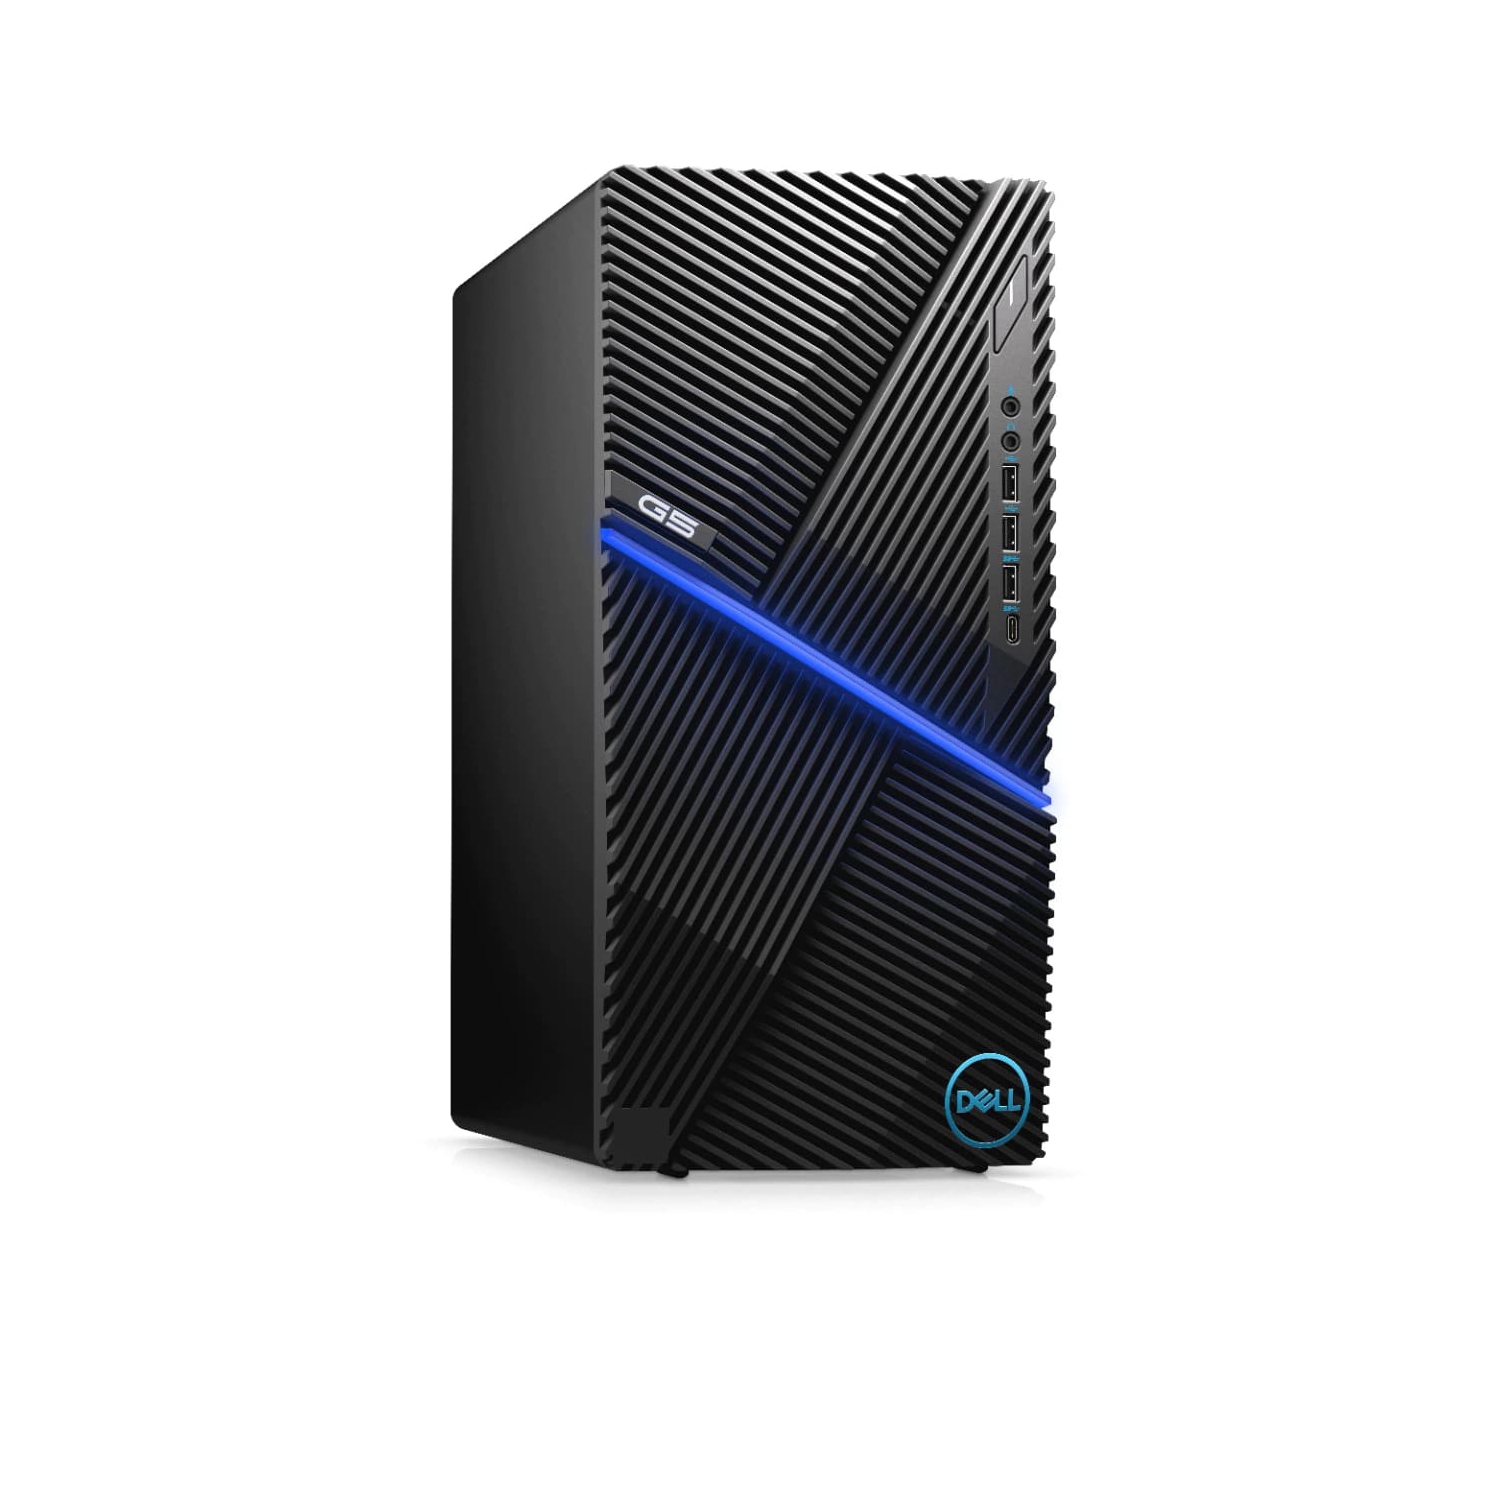 Refurbished (Excellent) - Dell G5 5000 Gaming Desktop (2020) | Core i7 - 2TB HDD + 1TB SSD - 32GB RAM - RTX 3060 | 8 Cores @ 5.1 GHz - 10th Gen CPU Certified Refurbished